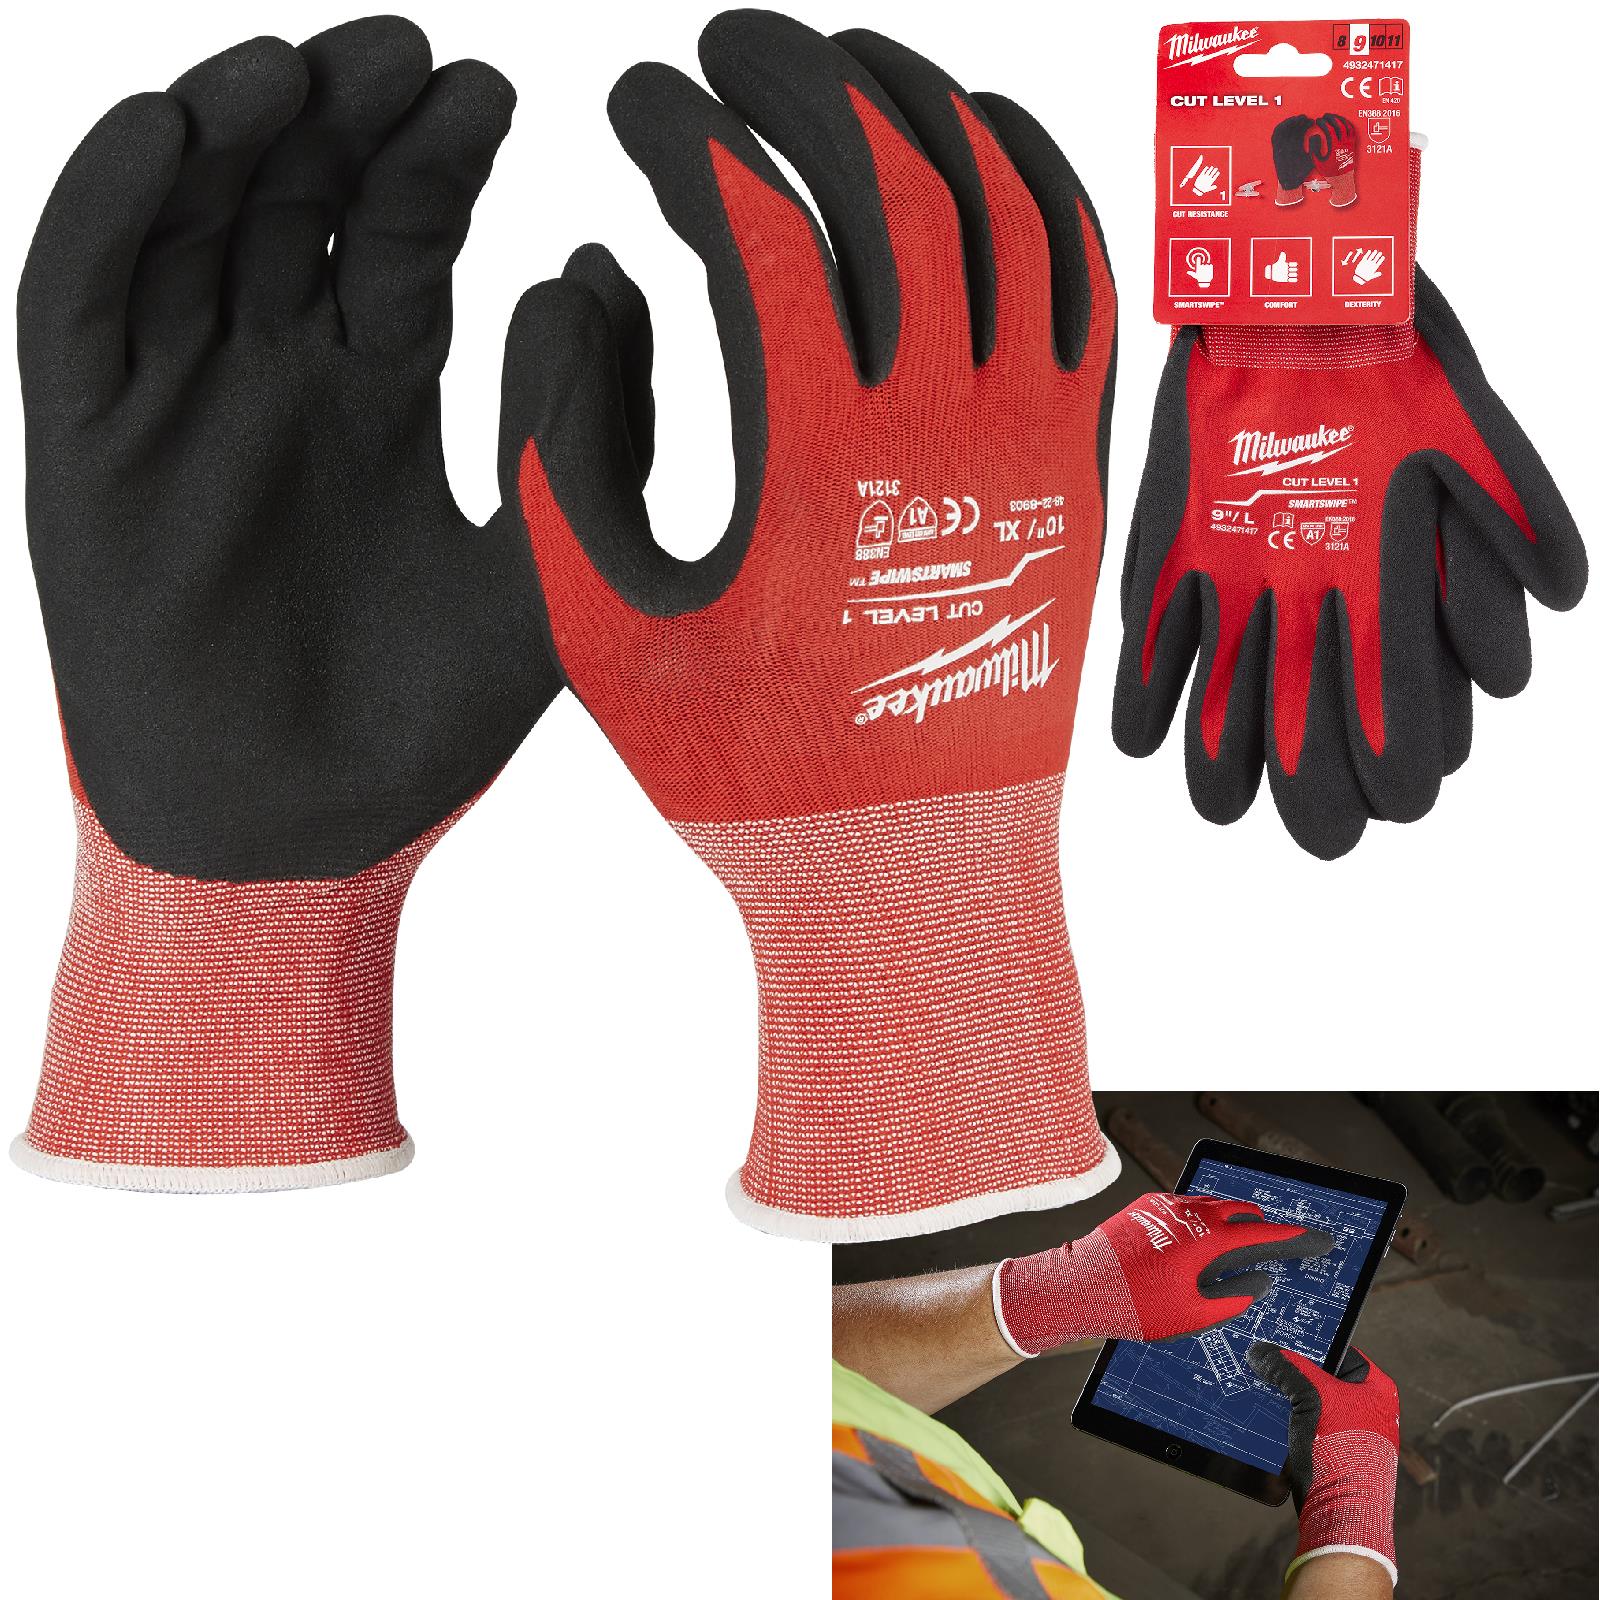 Milwaukee Safety Gloves Cut Level 1/A Dipped Glove Size 10 / XL Extra